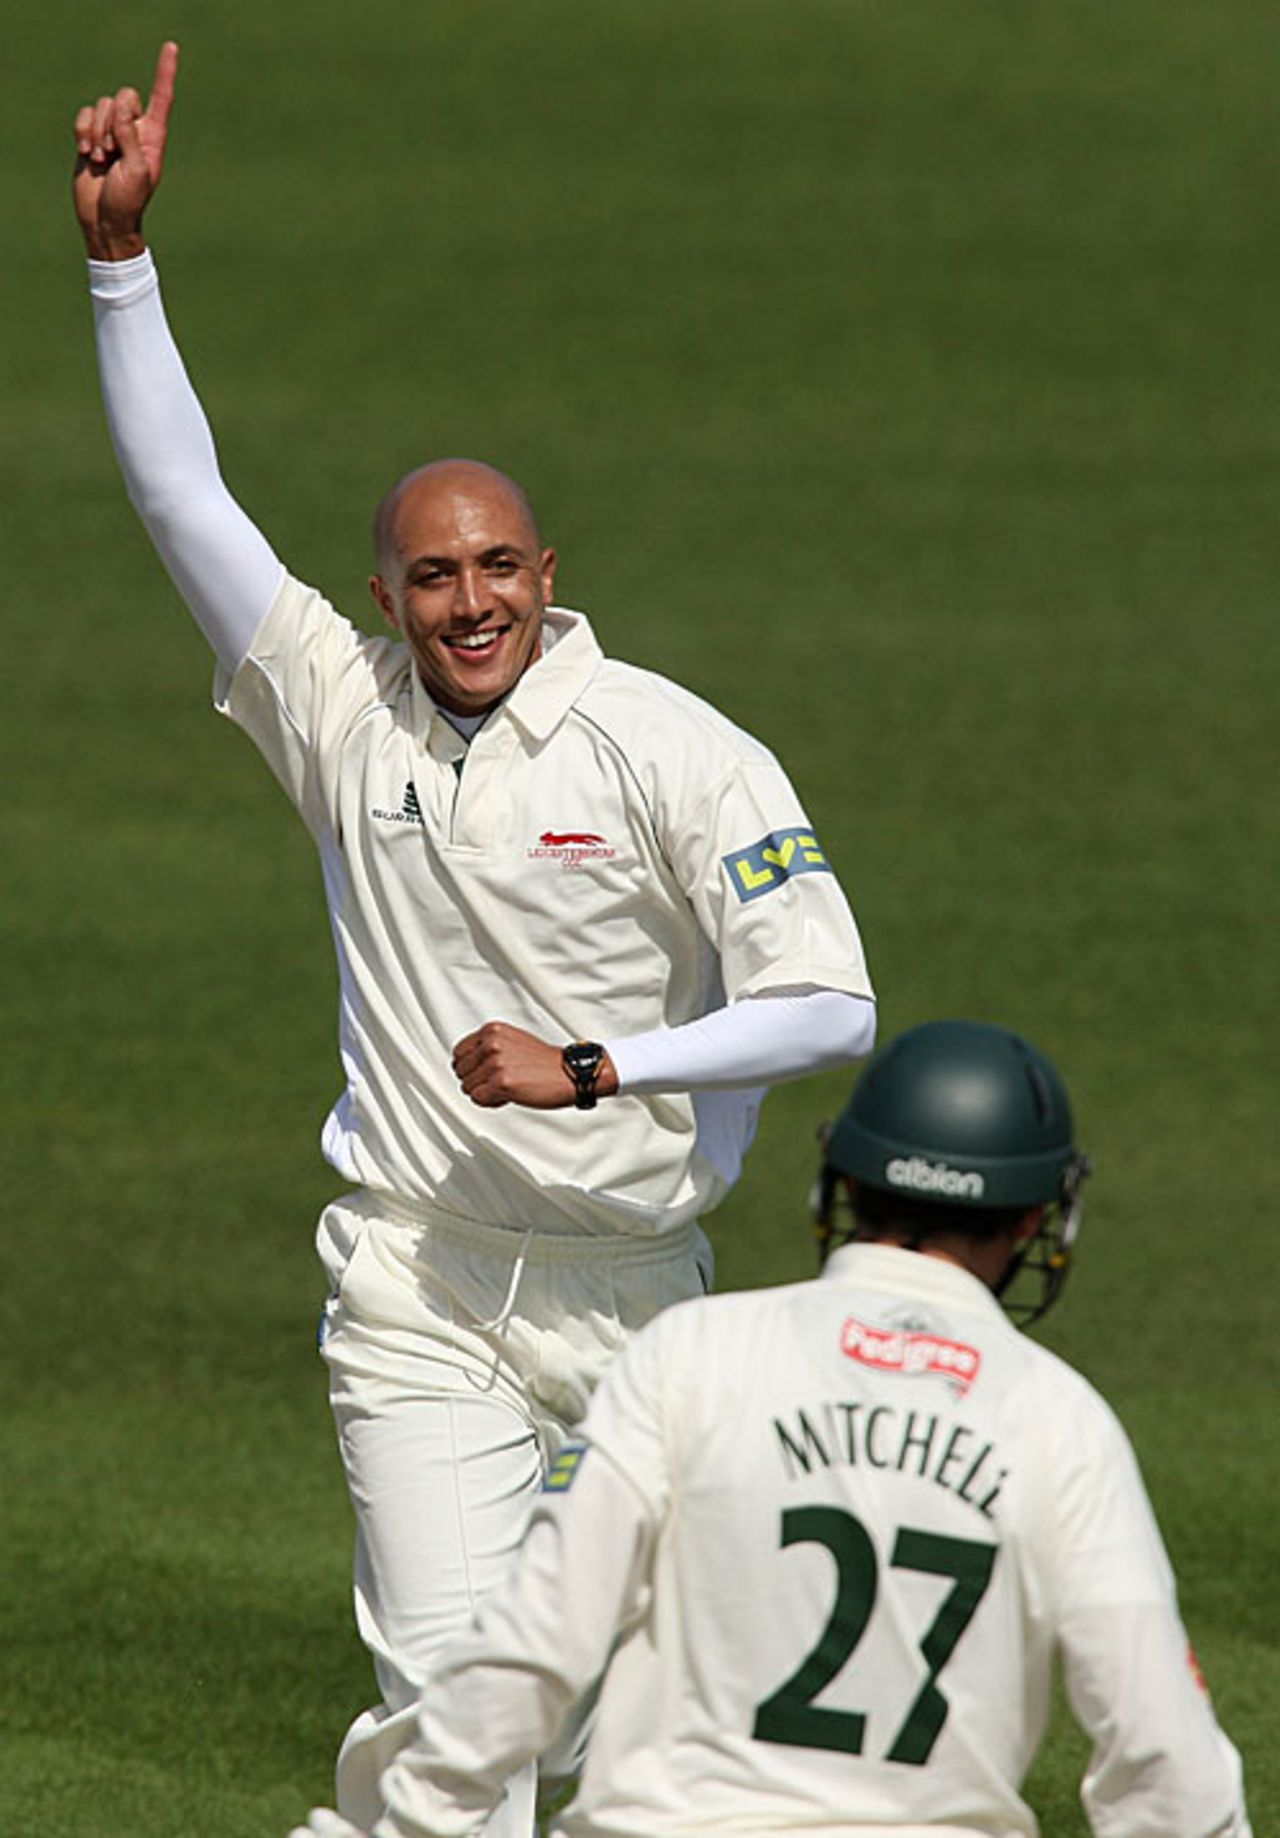 Garnett Kruger celebrates the wicket of Daryl Mitchell, Worcestershire v Leicestershire, Worcester, April 23 2008